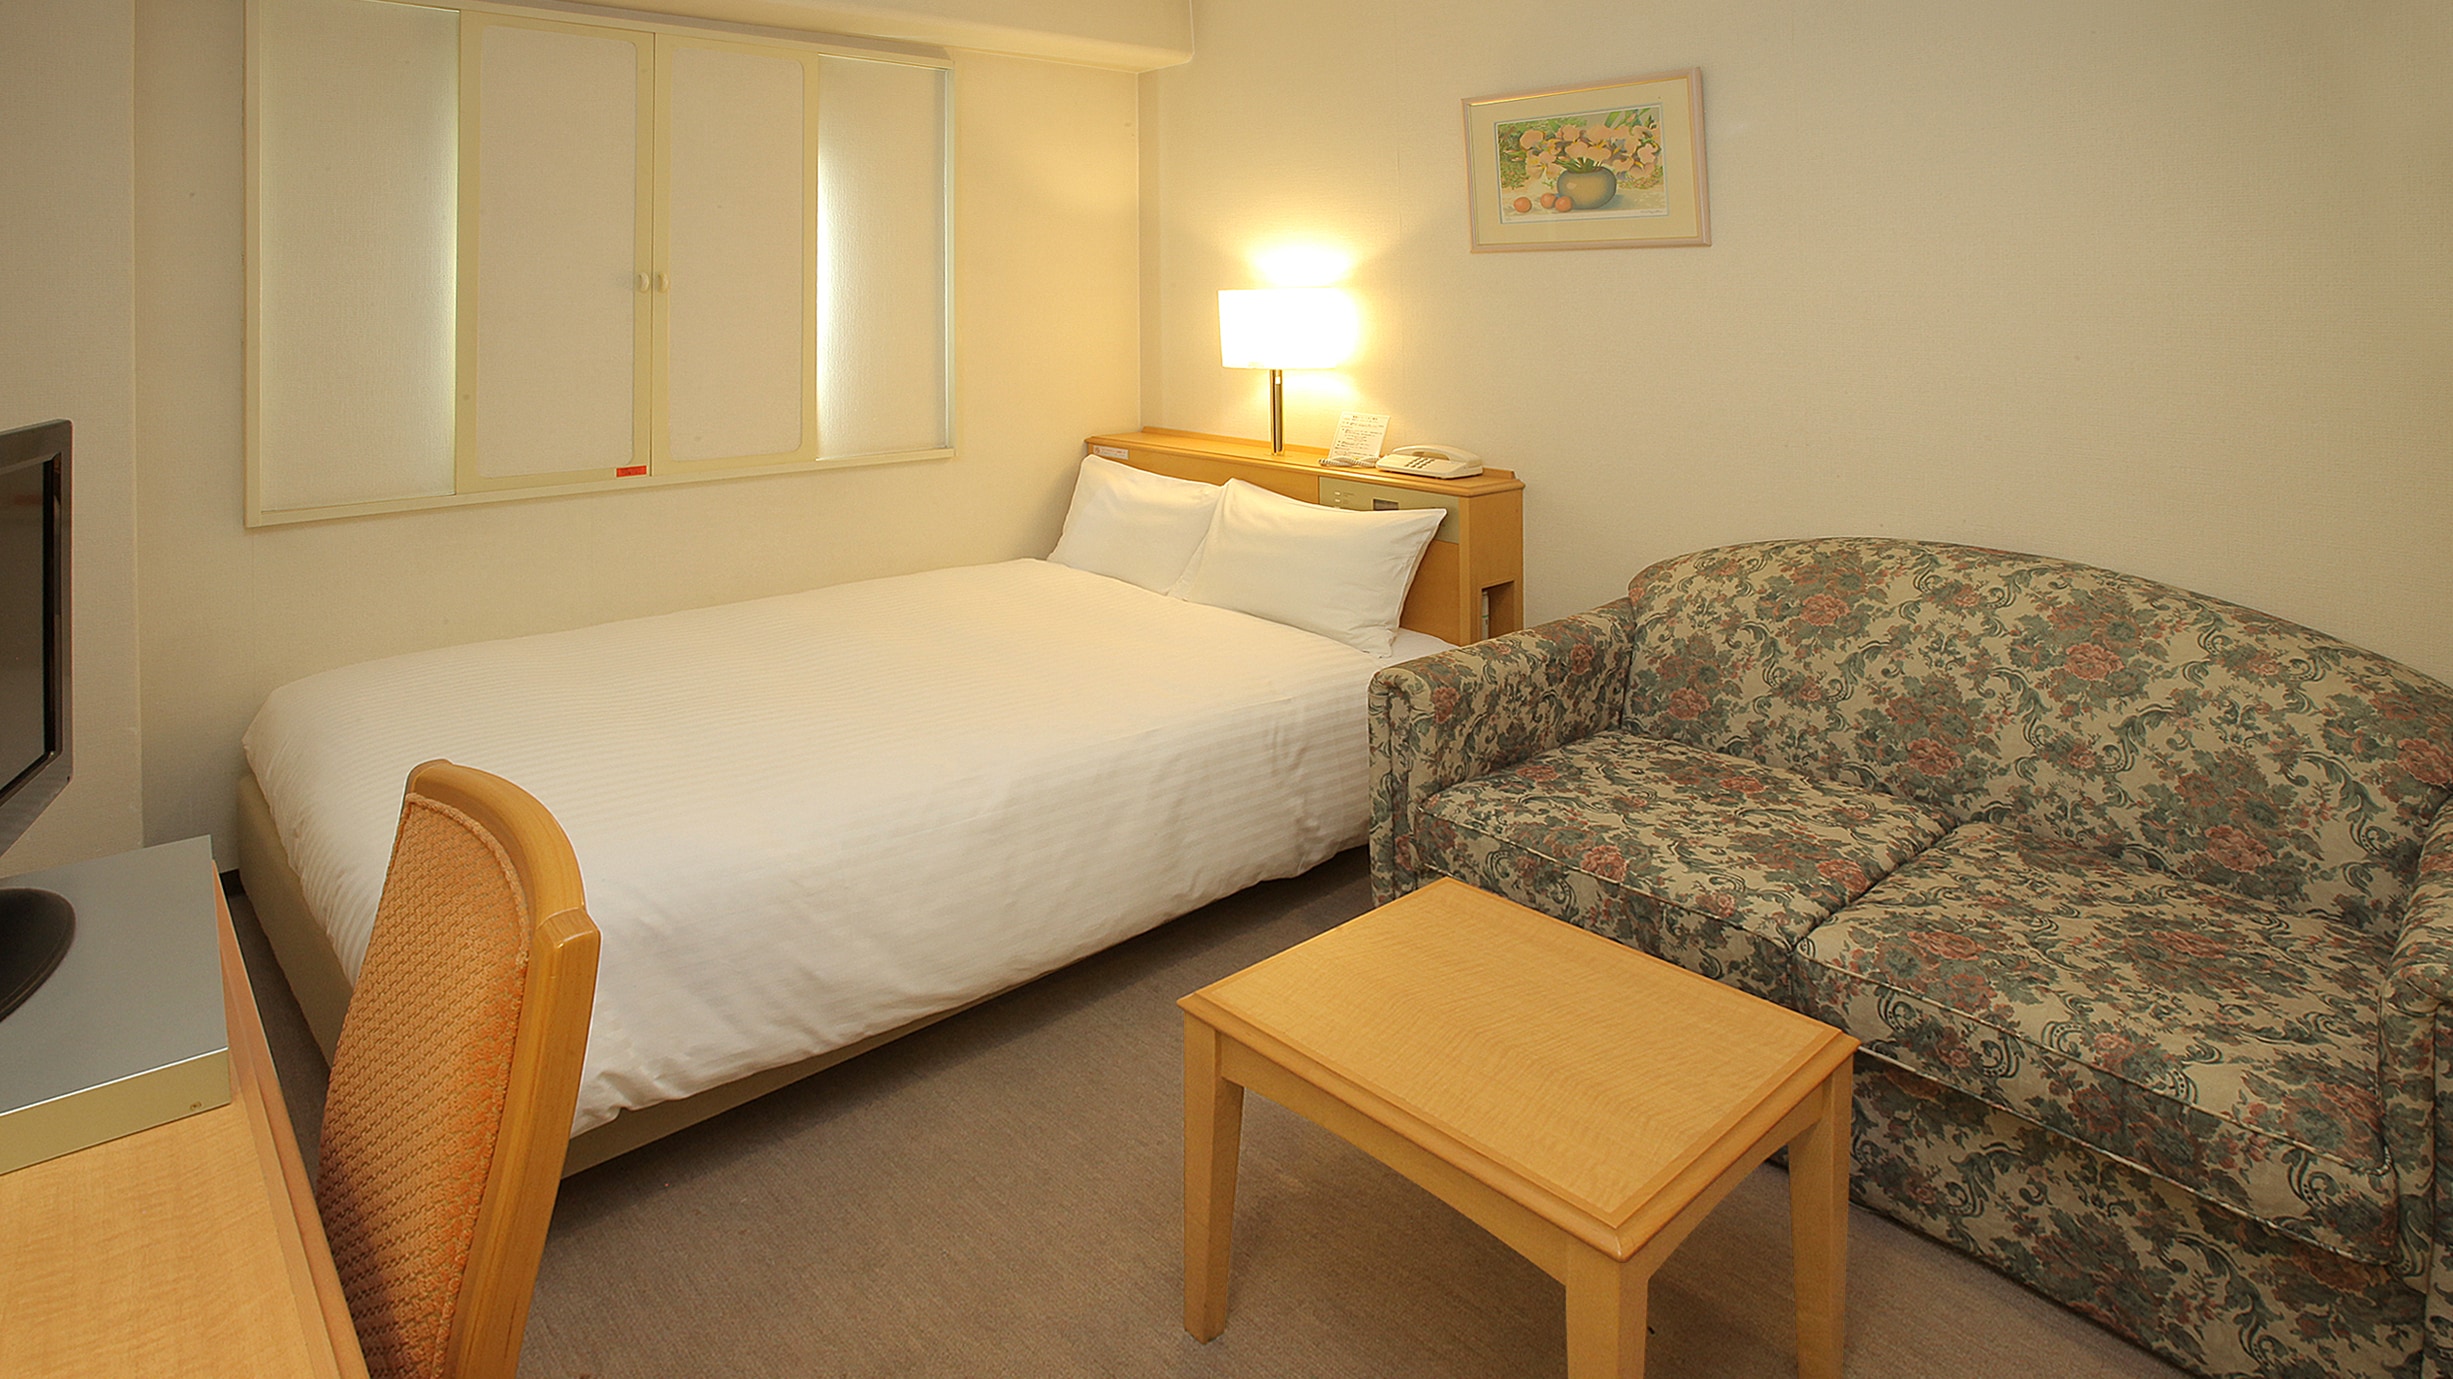 Deluxe semi-double room ◇ Area 14.5㎡ ◇ All rooms are duvet style ◇